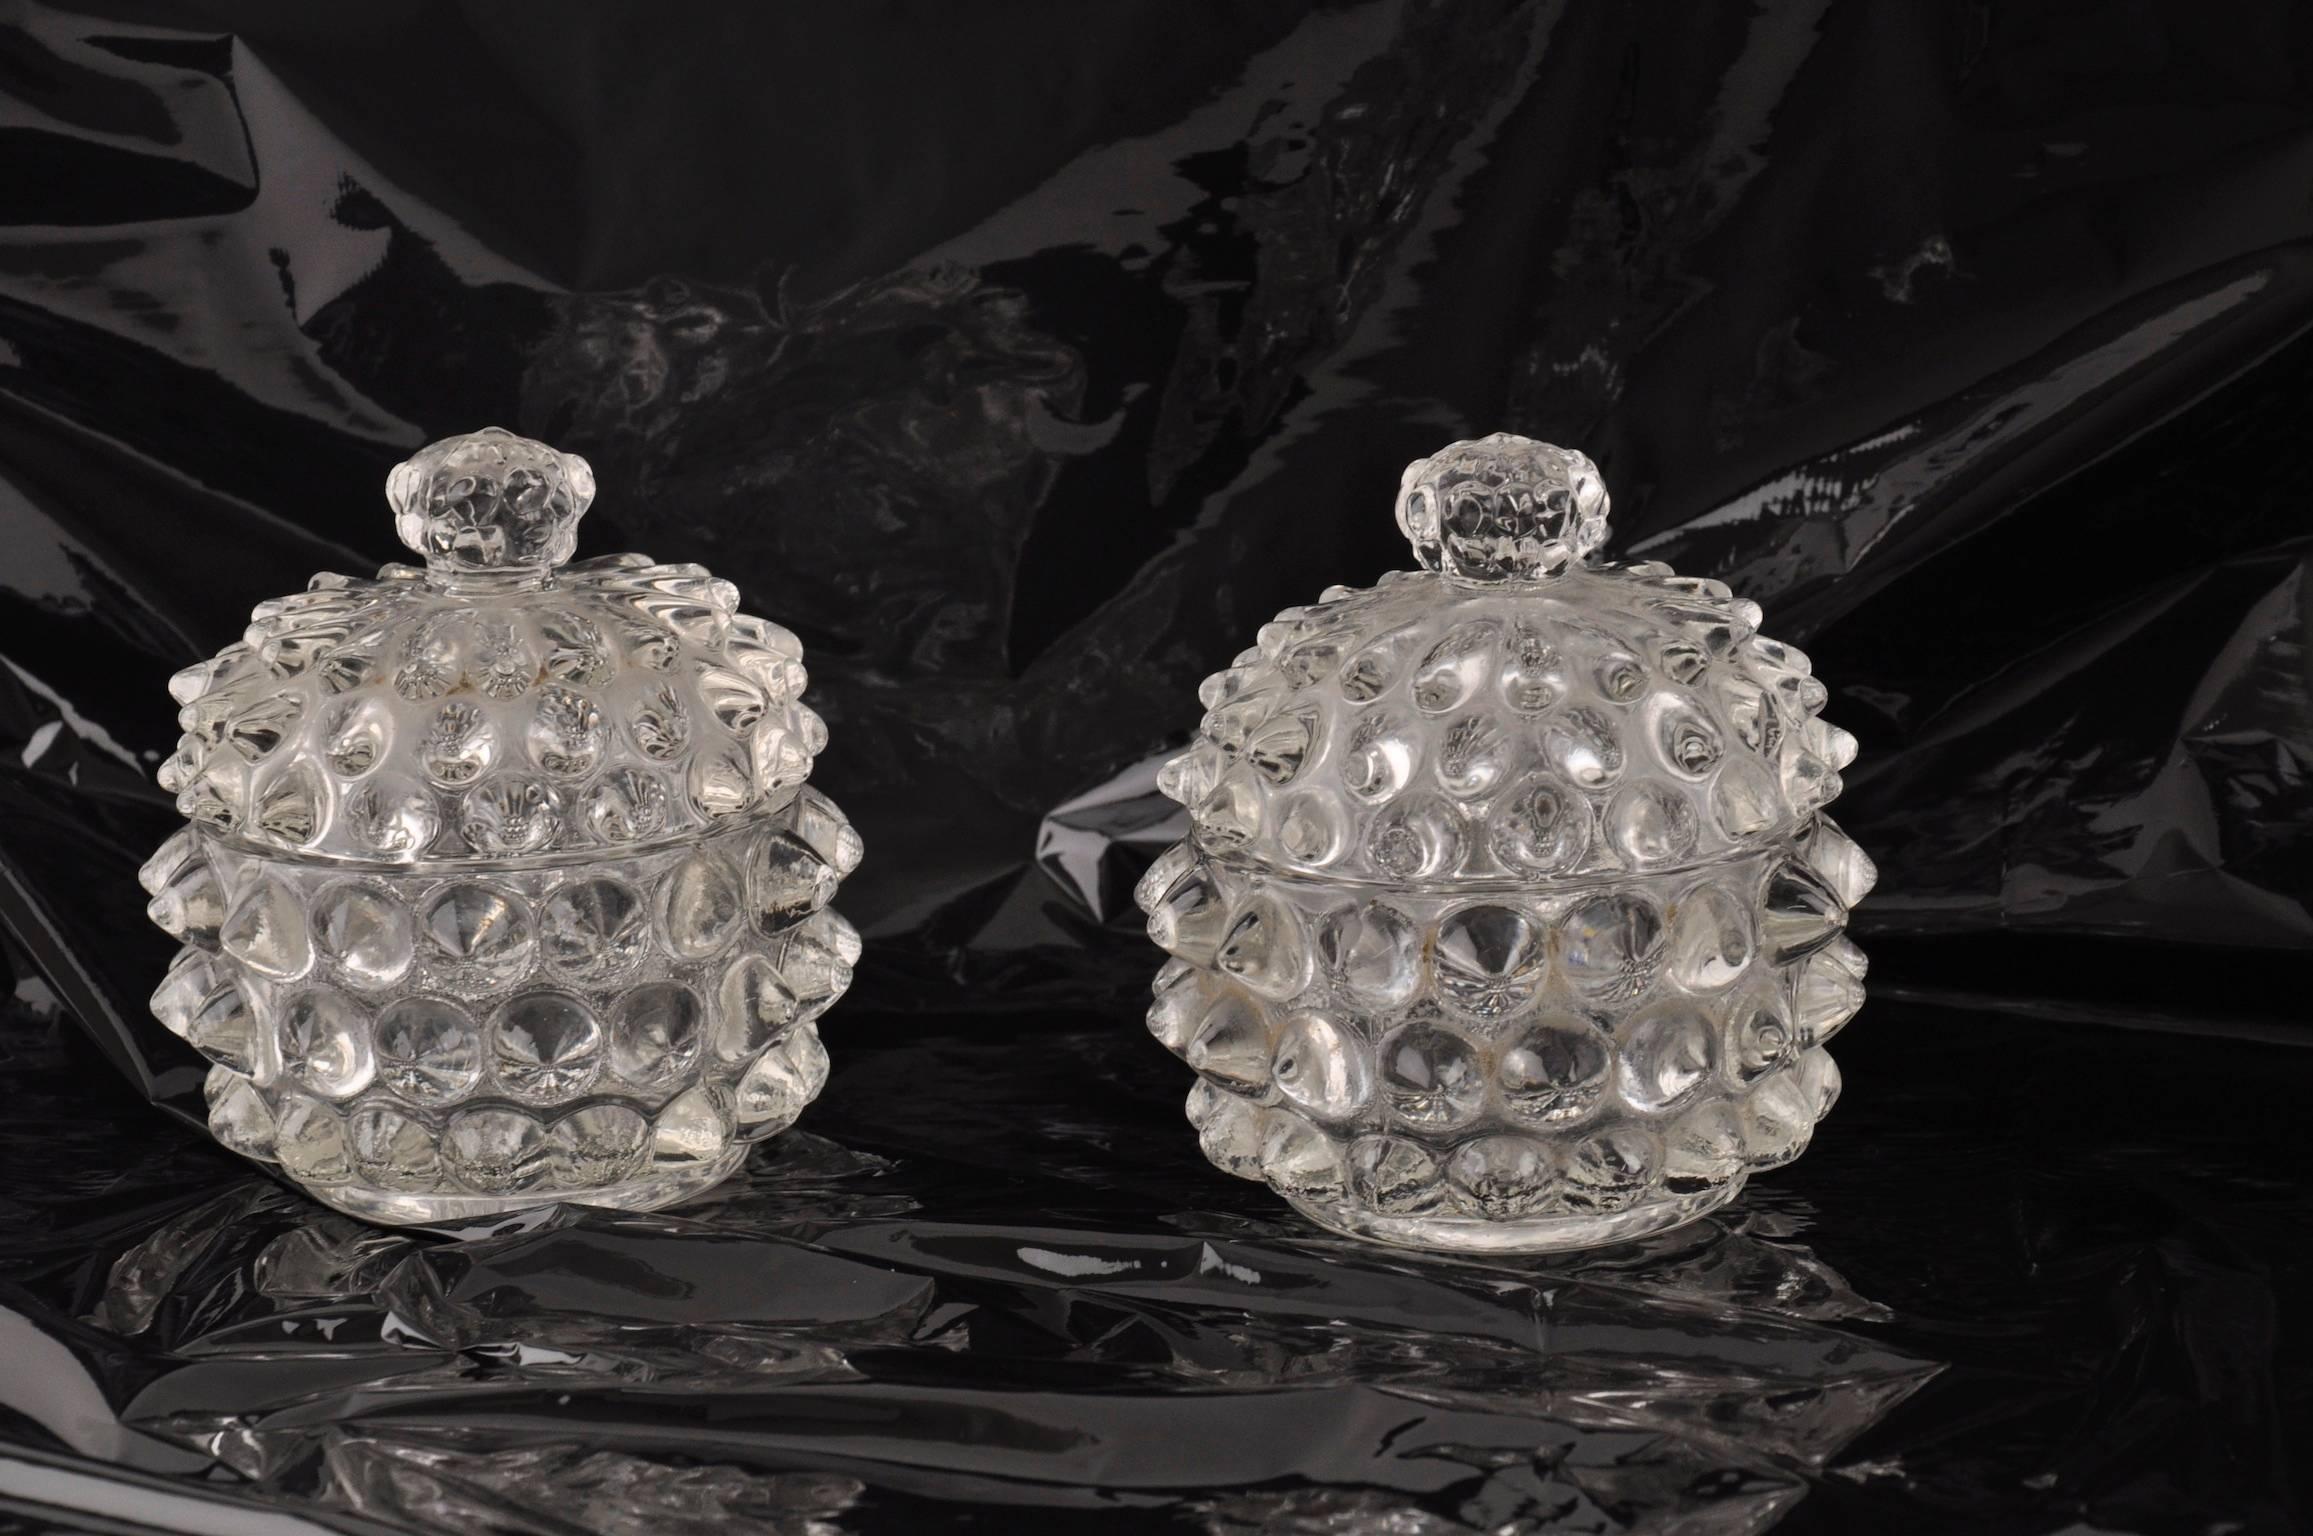 Pair of Rostrato Glass boxes or bowls by Murano, in the tradition of houses as Venini.